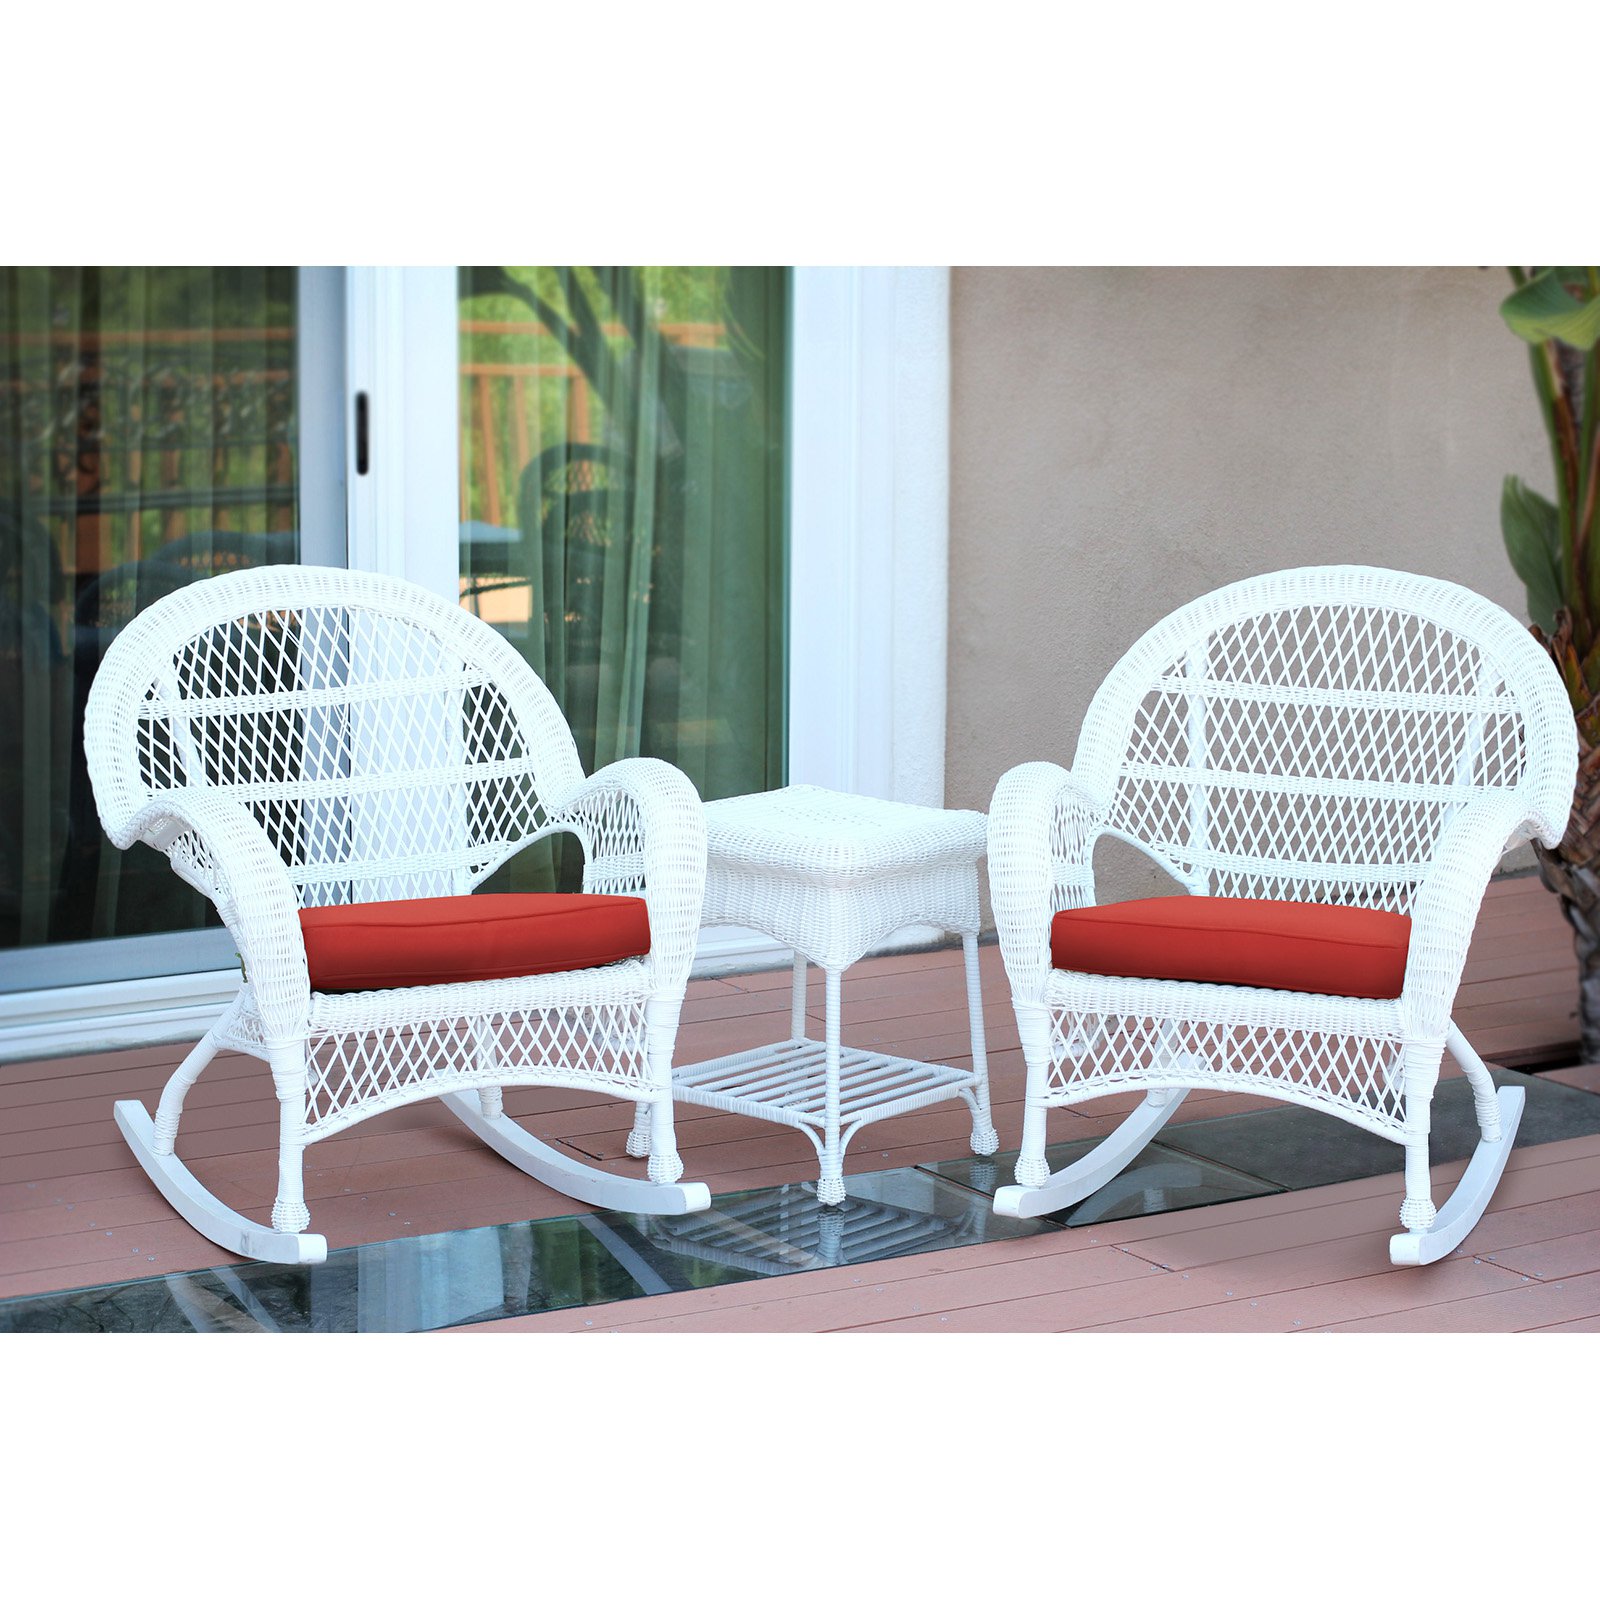 Jeco Santa Maria 3 Piece Wicker Rocker Chat Set with Optional Cushion - image 2 of 11